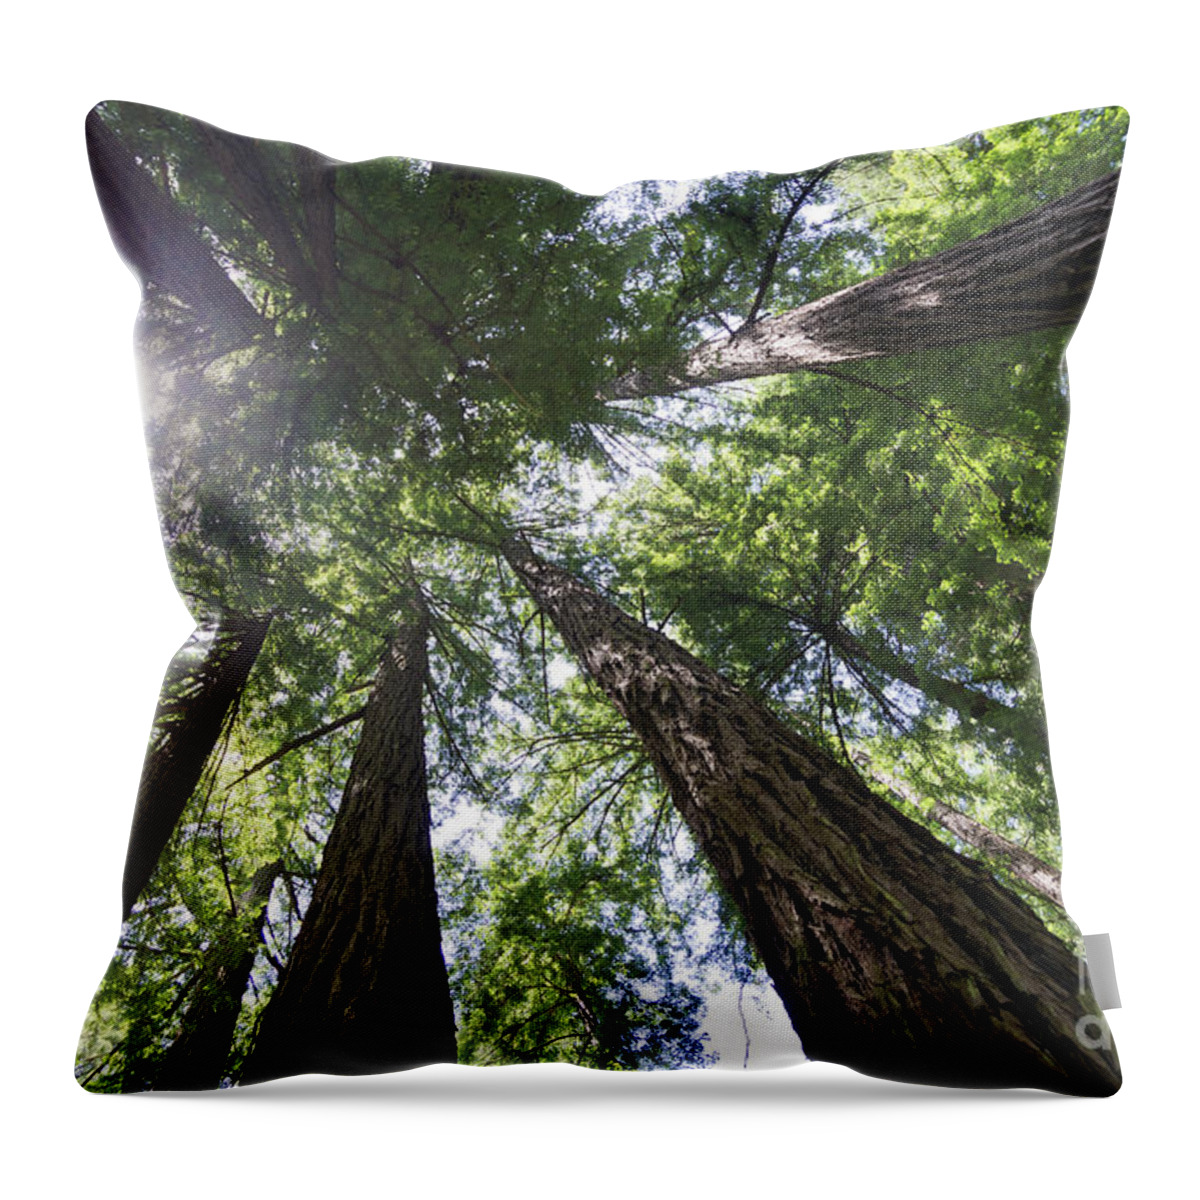 Tree Throw Pillow featuring the photograph Muir Woods No.1 by Scott Evers